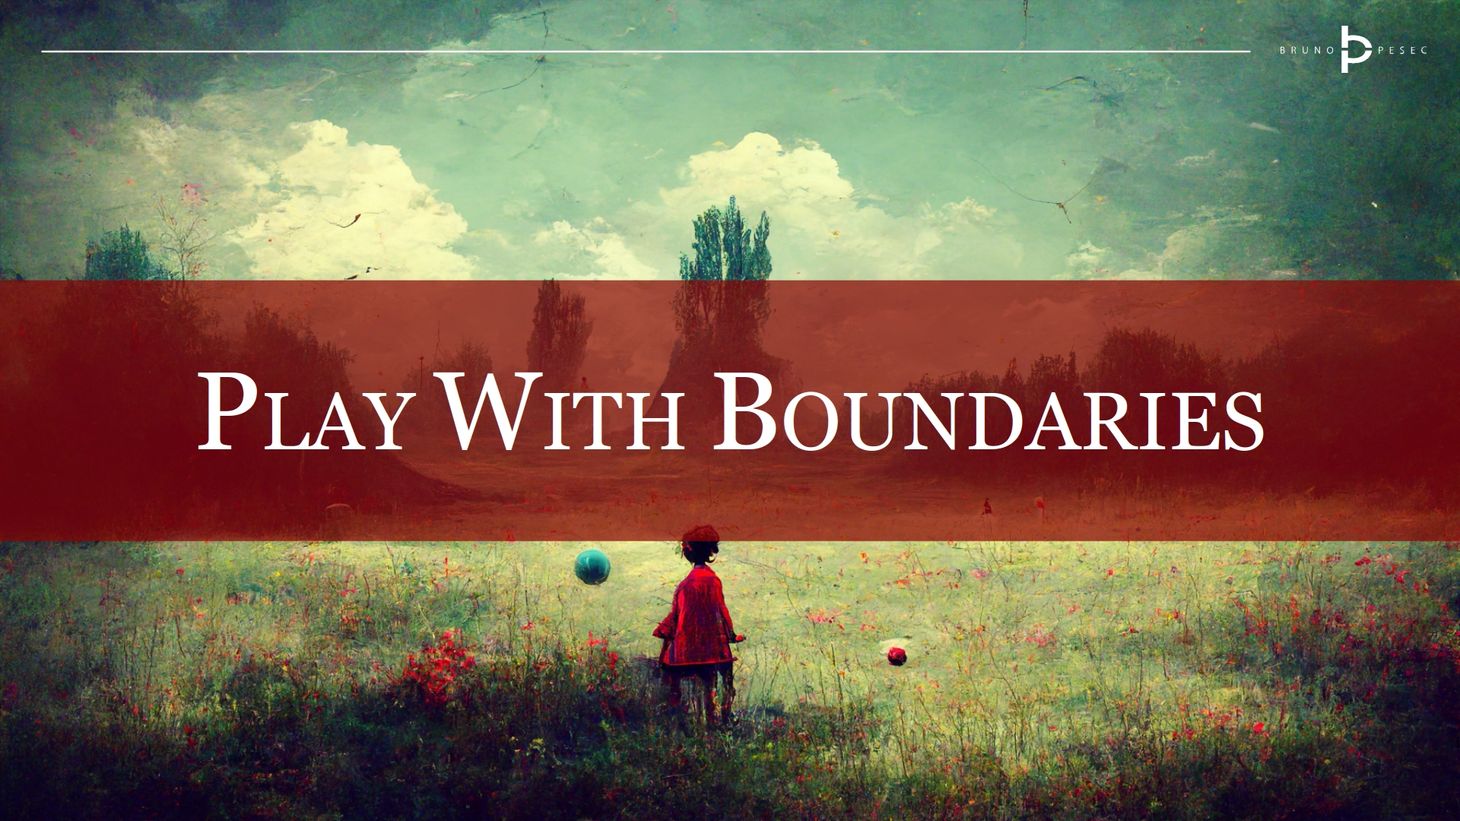 Play with boundaries